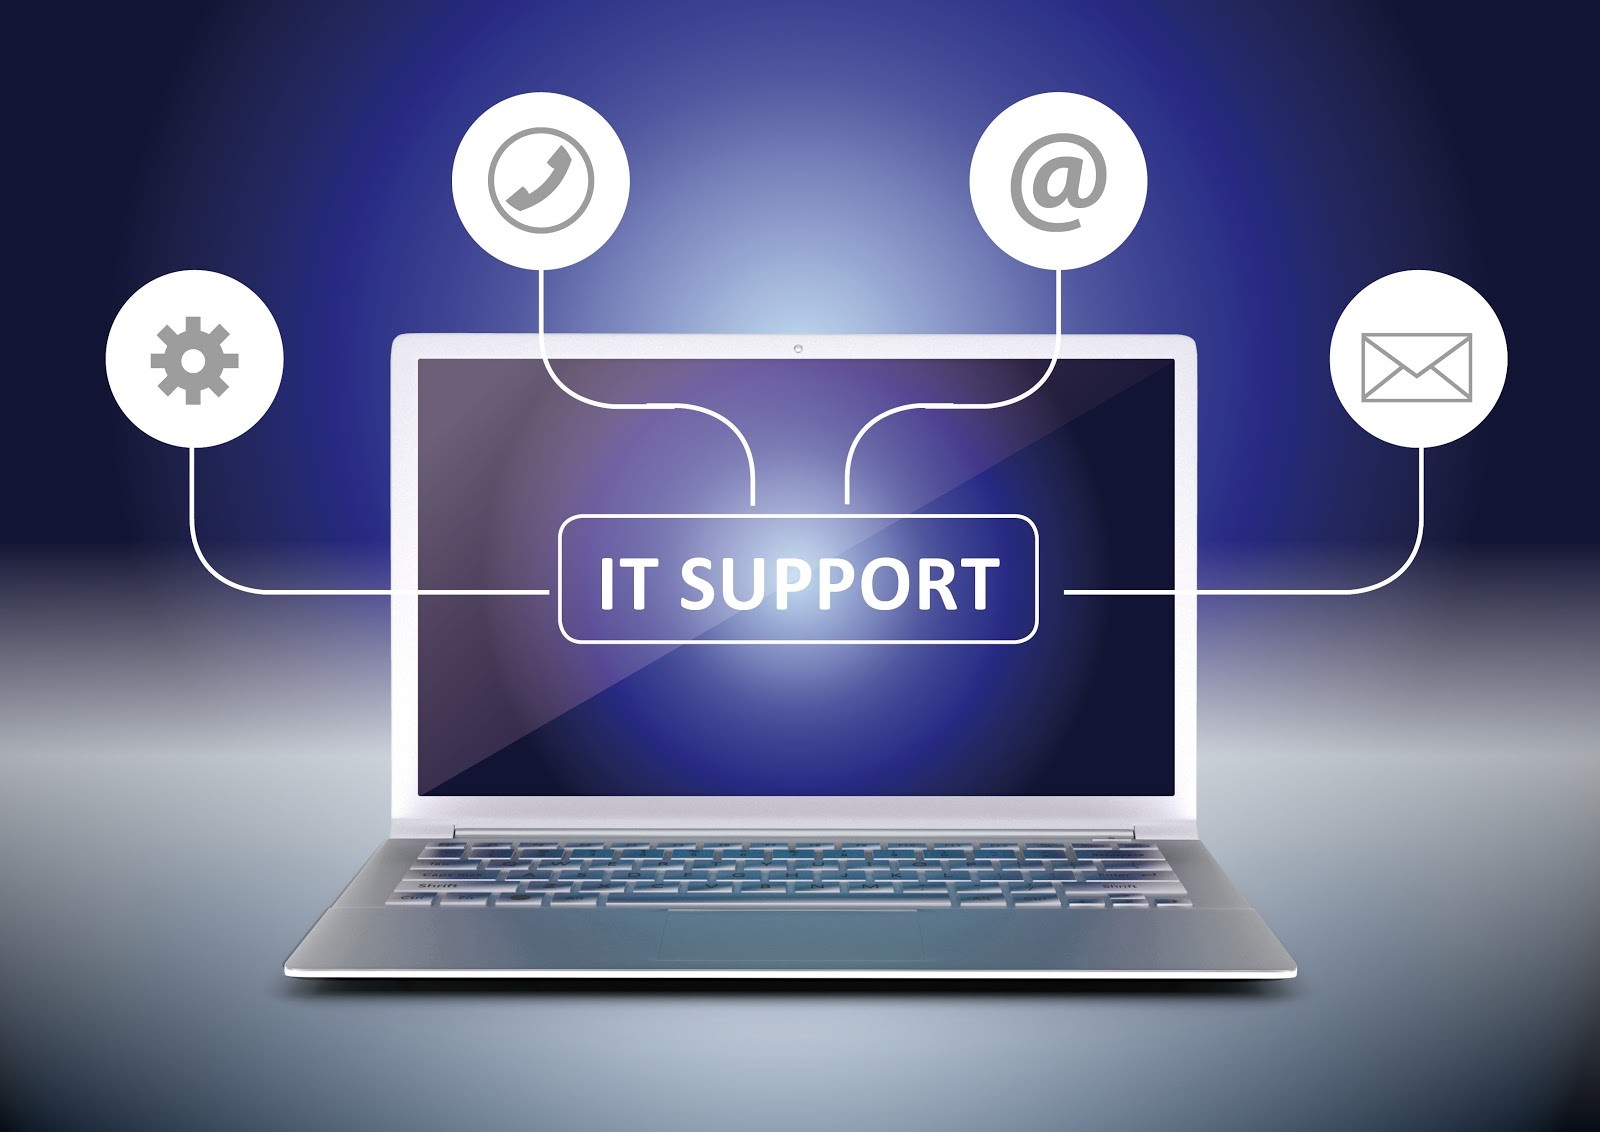 How you can save money hiring IT support rather than hiring internally